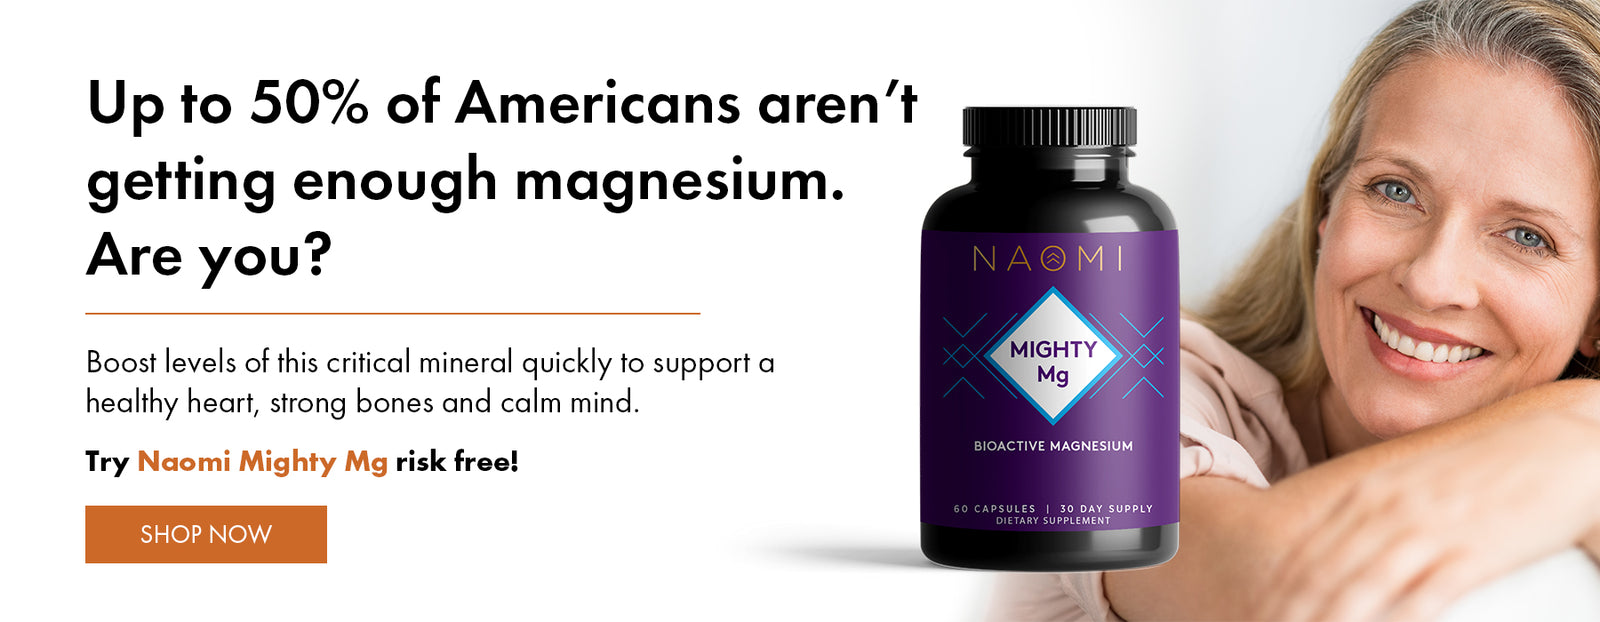 Up to 50% of Americans aren't getting enough magnesium. Are you? Boost levels of this critical mineral quickly to support a healthy heart, strong bones and calm mind. Try Naomi Mighty Mg risk free!